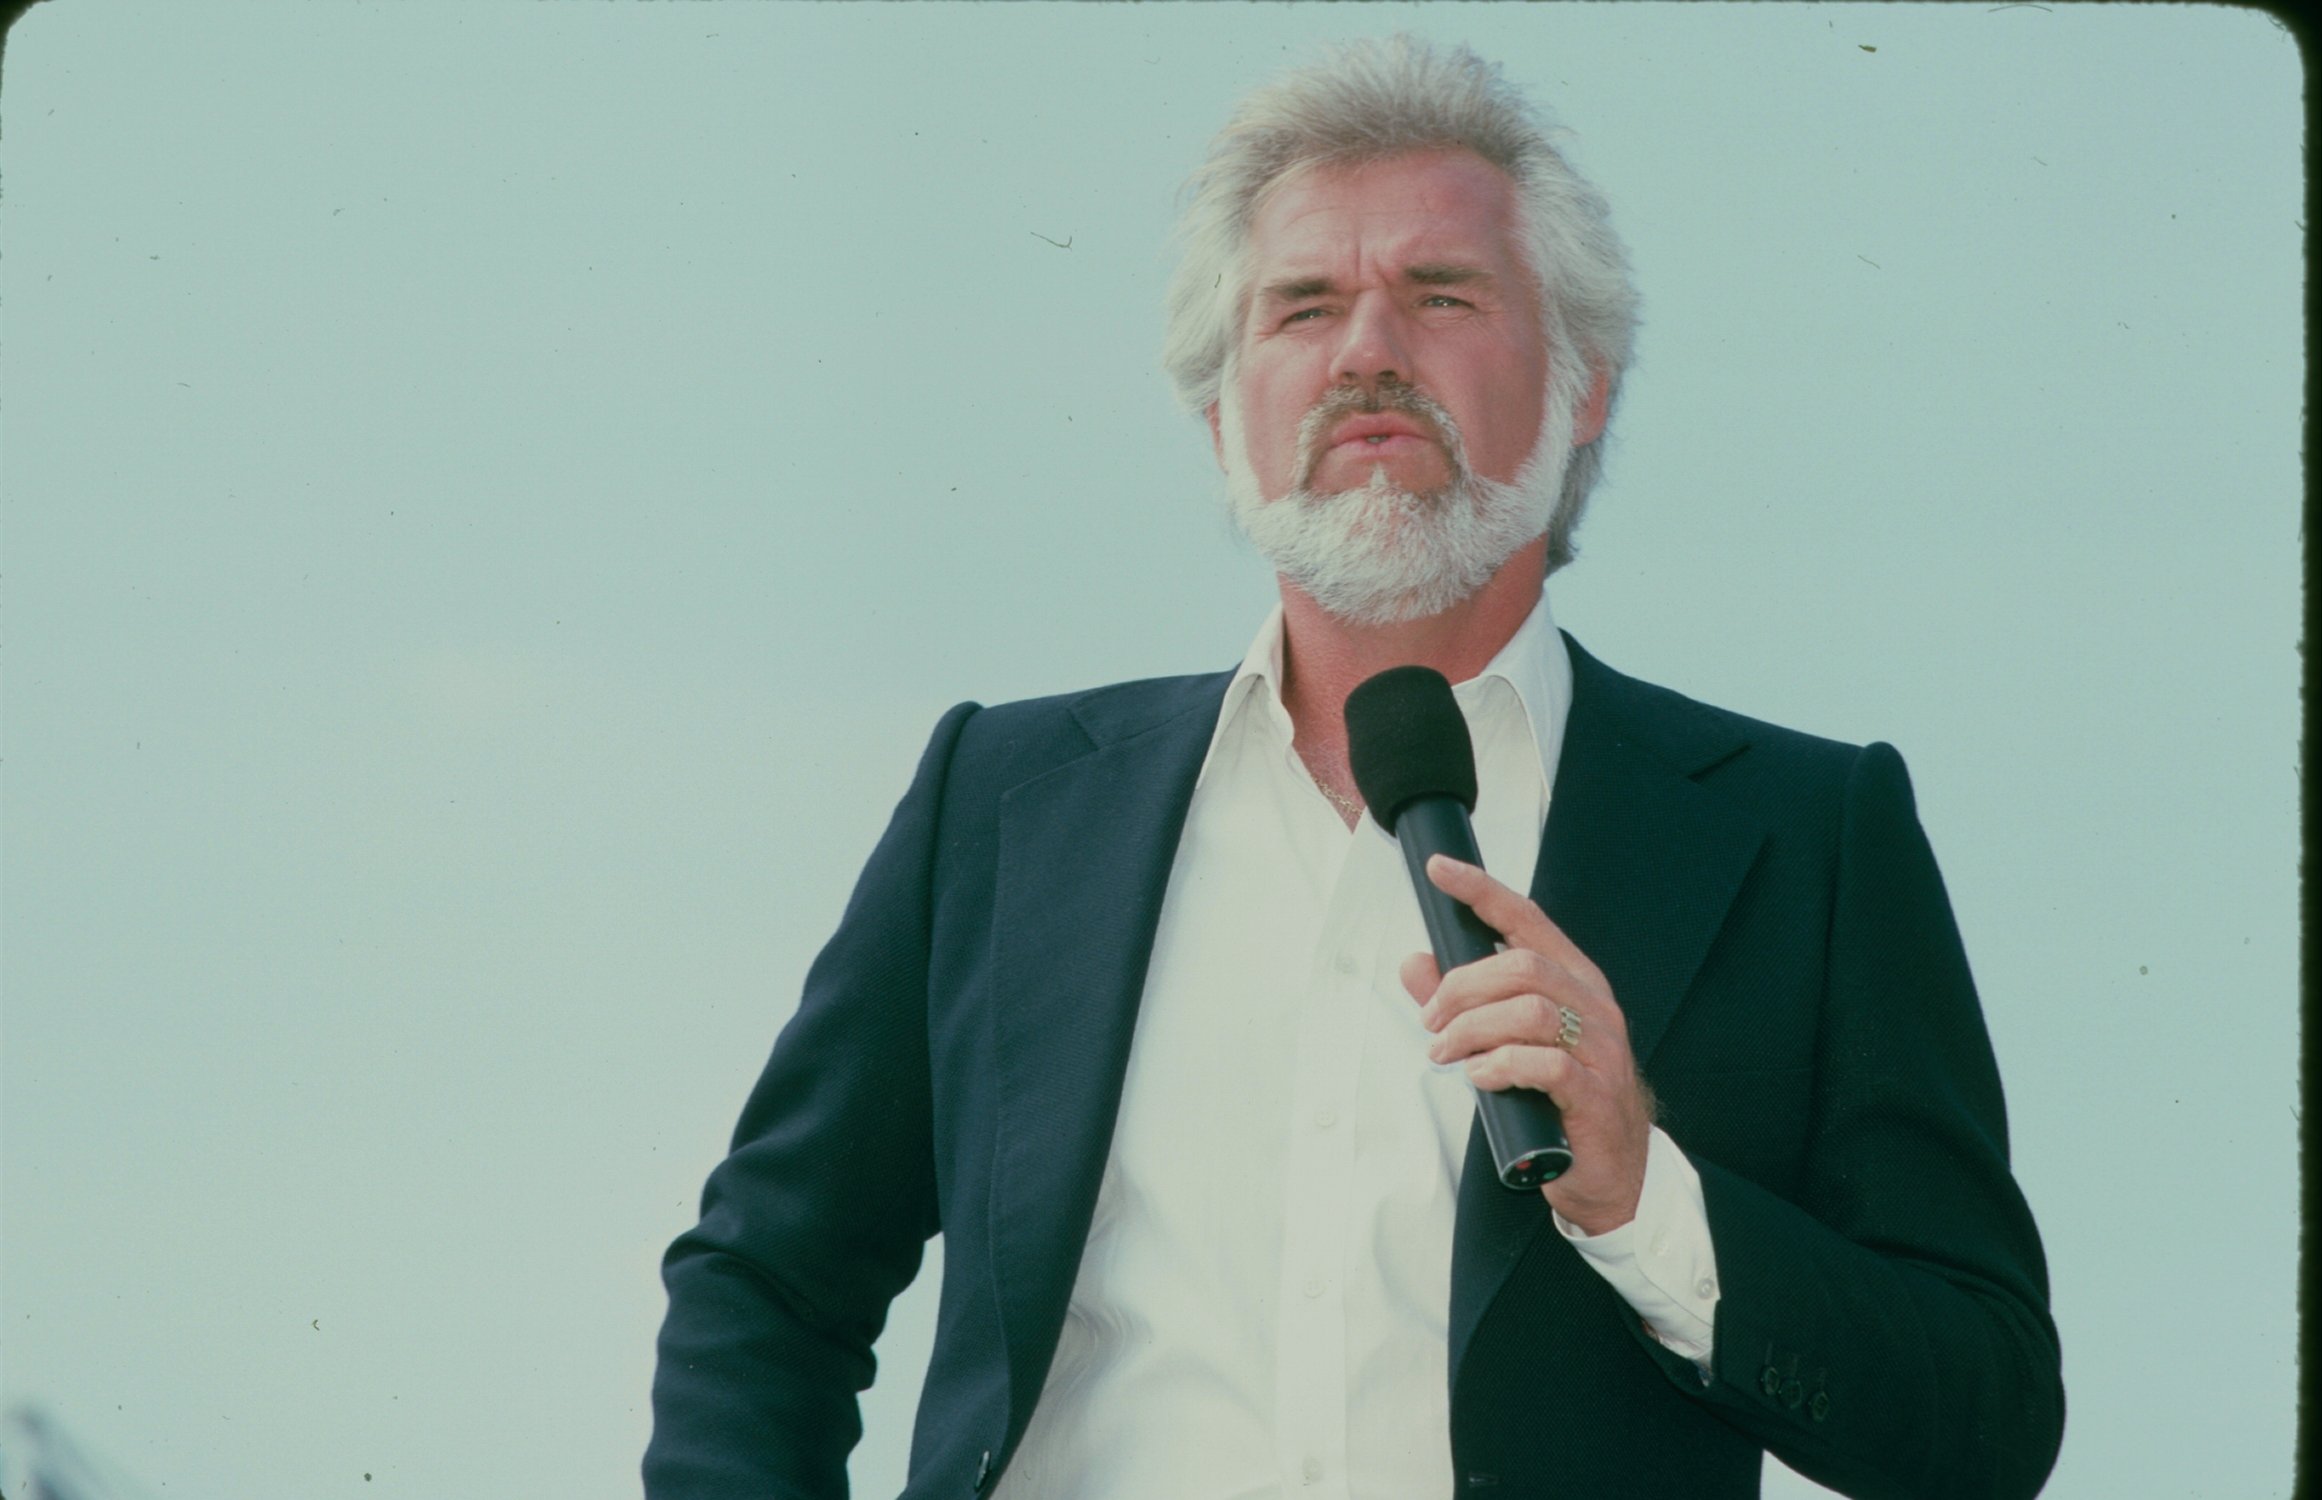 Kenny Rogers | The LIFE Picture Collection via Getty Images